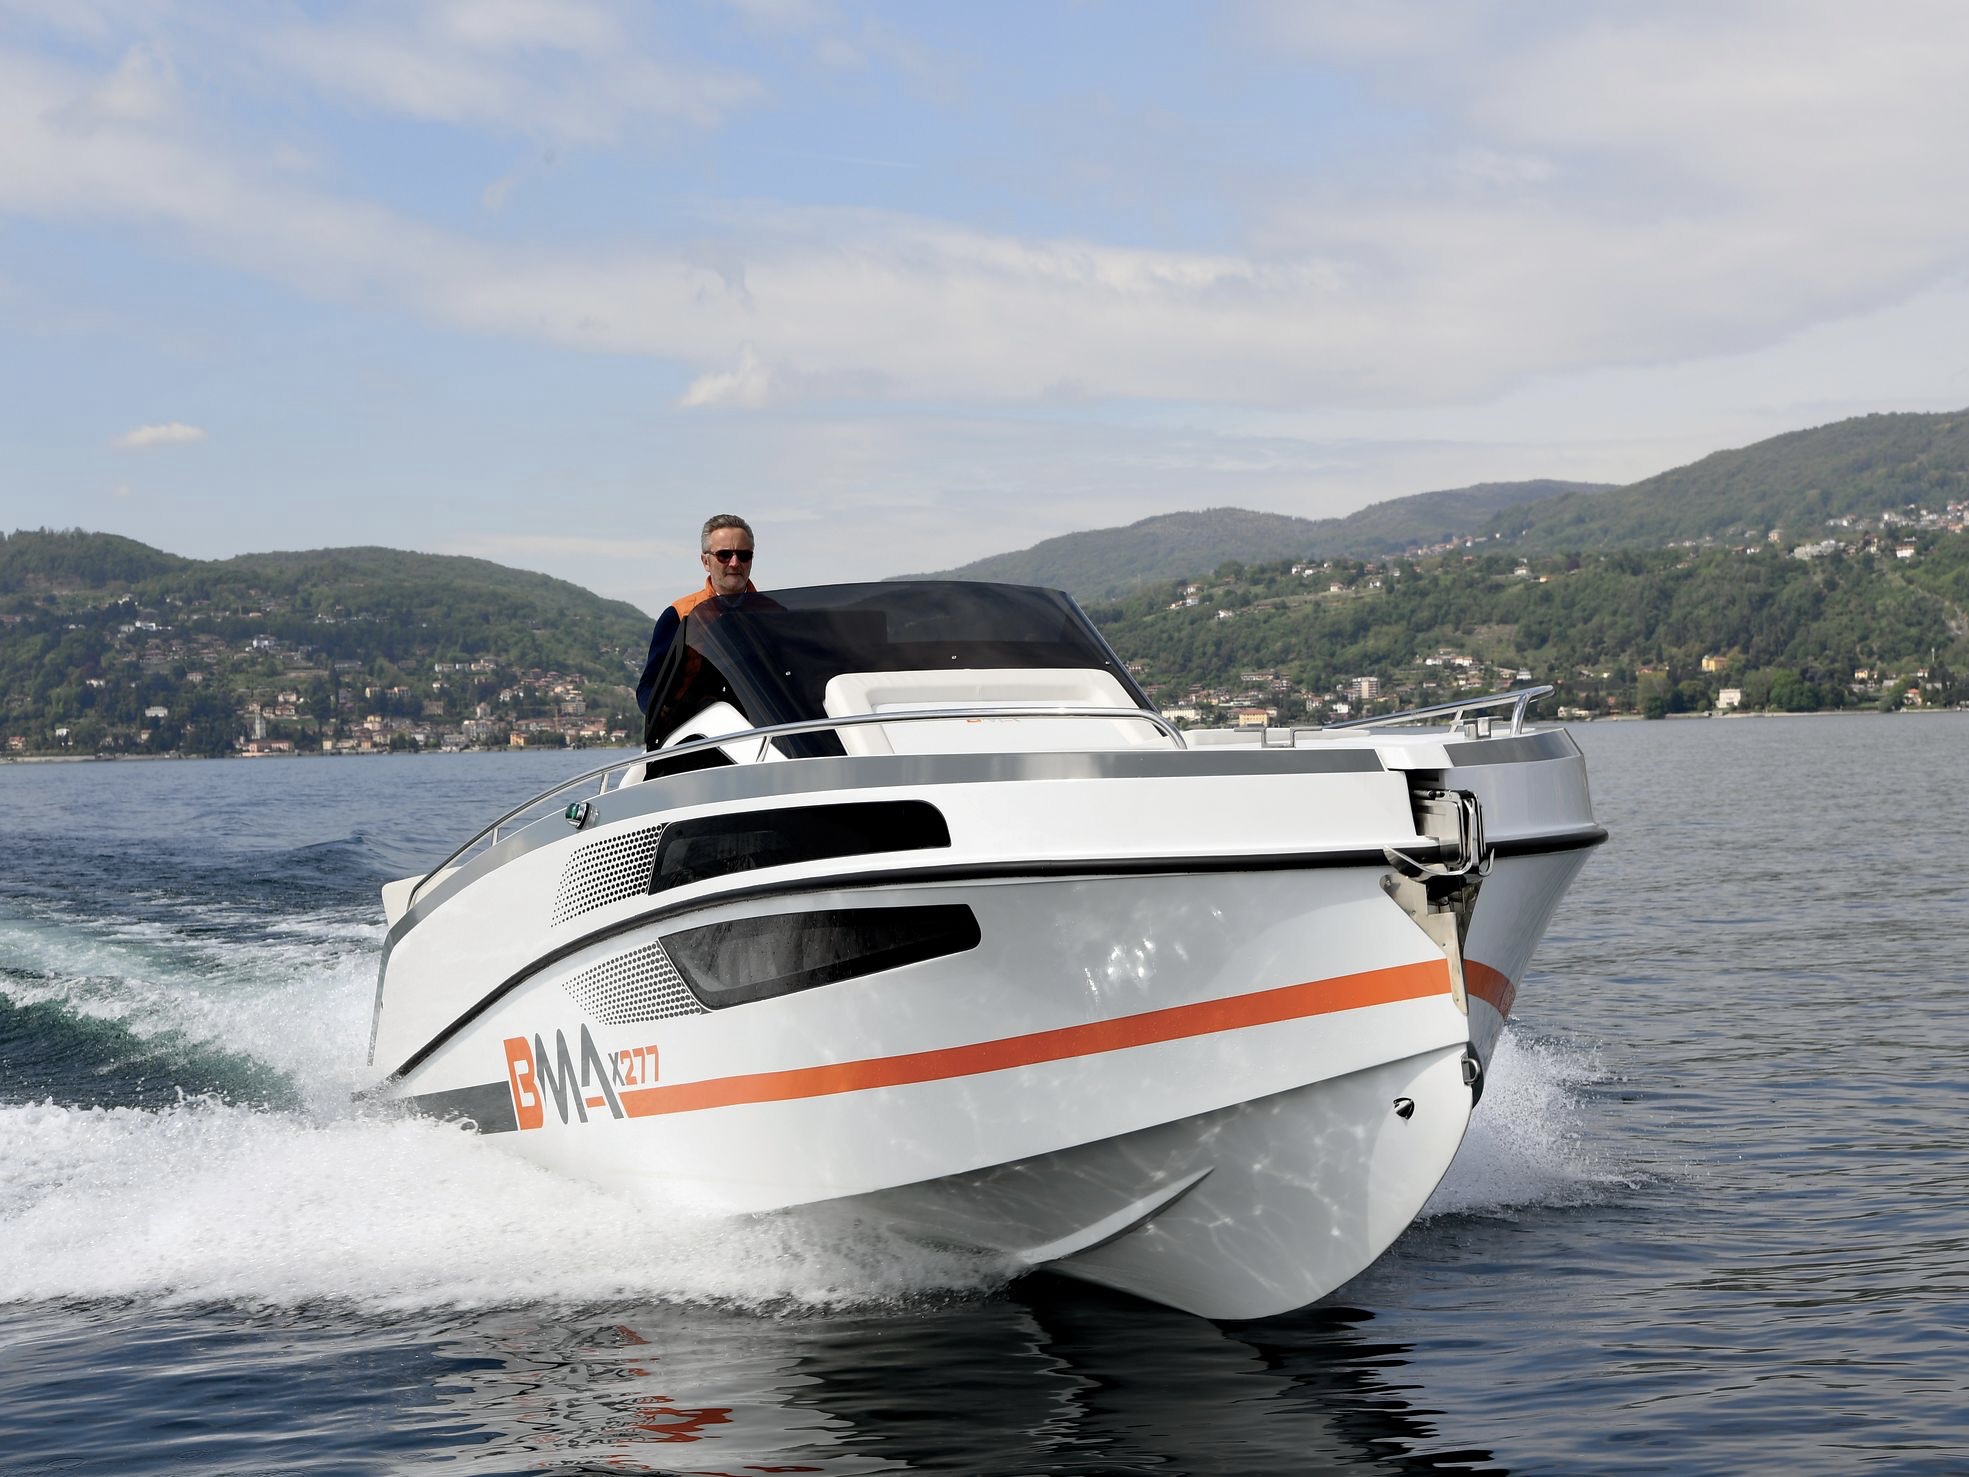 Sud yachting - GAMME CABINE